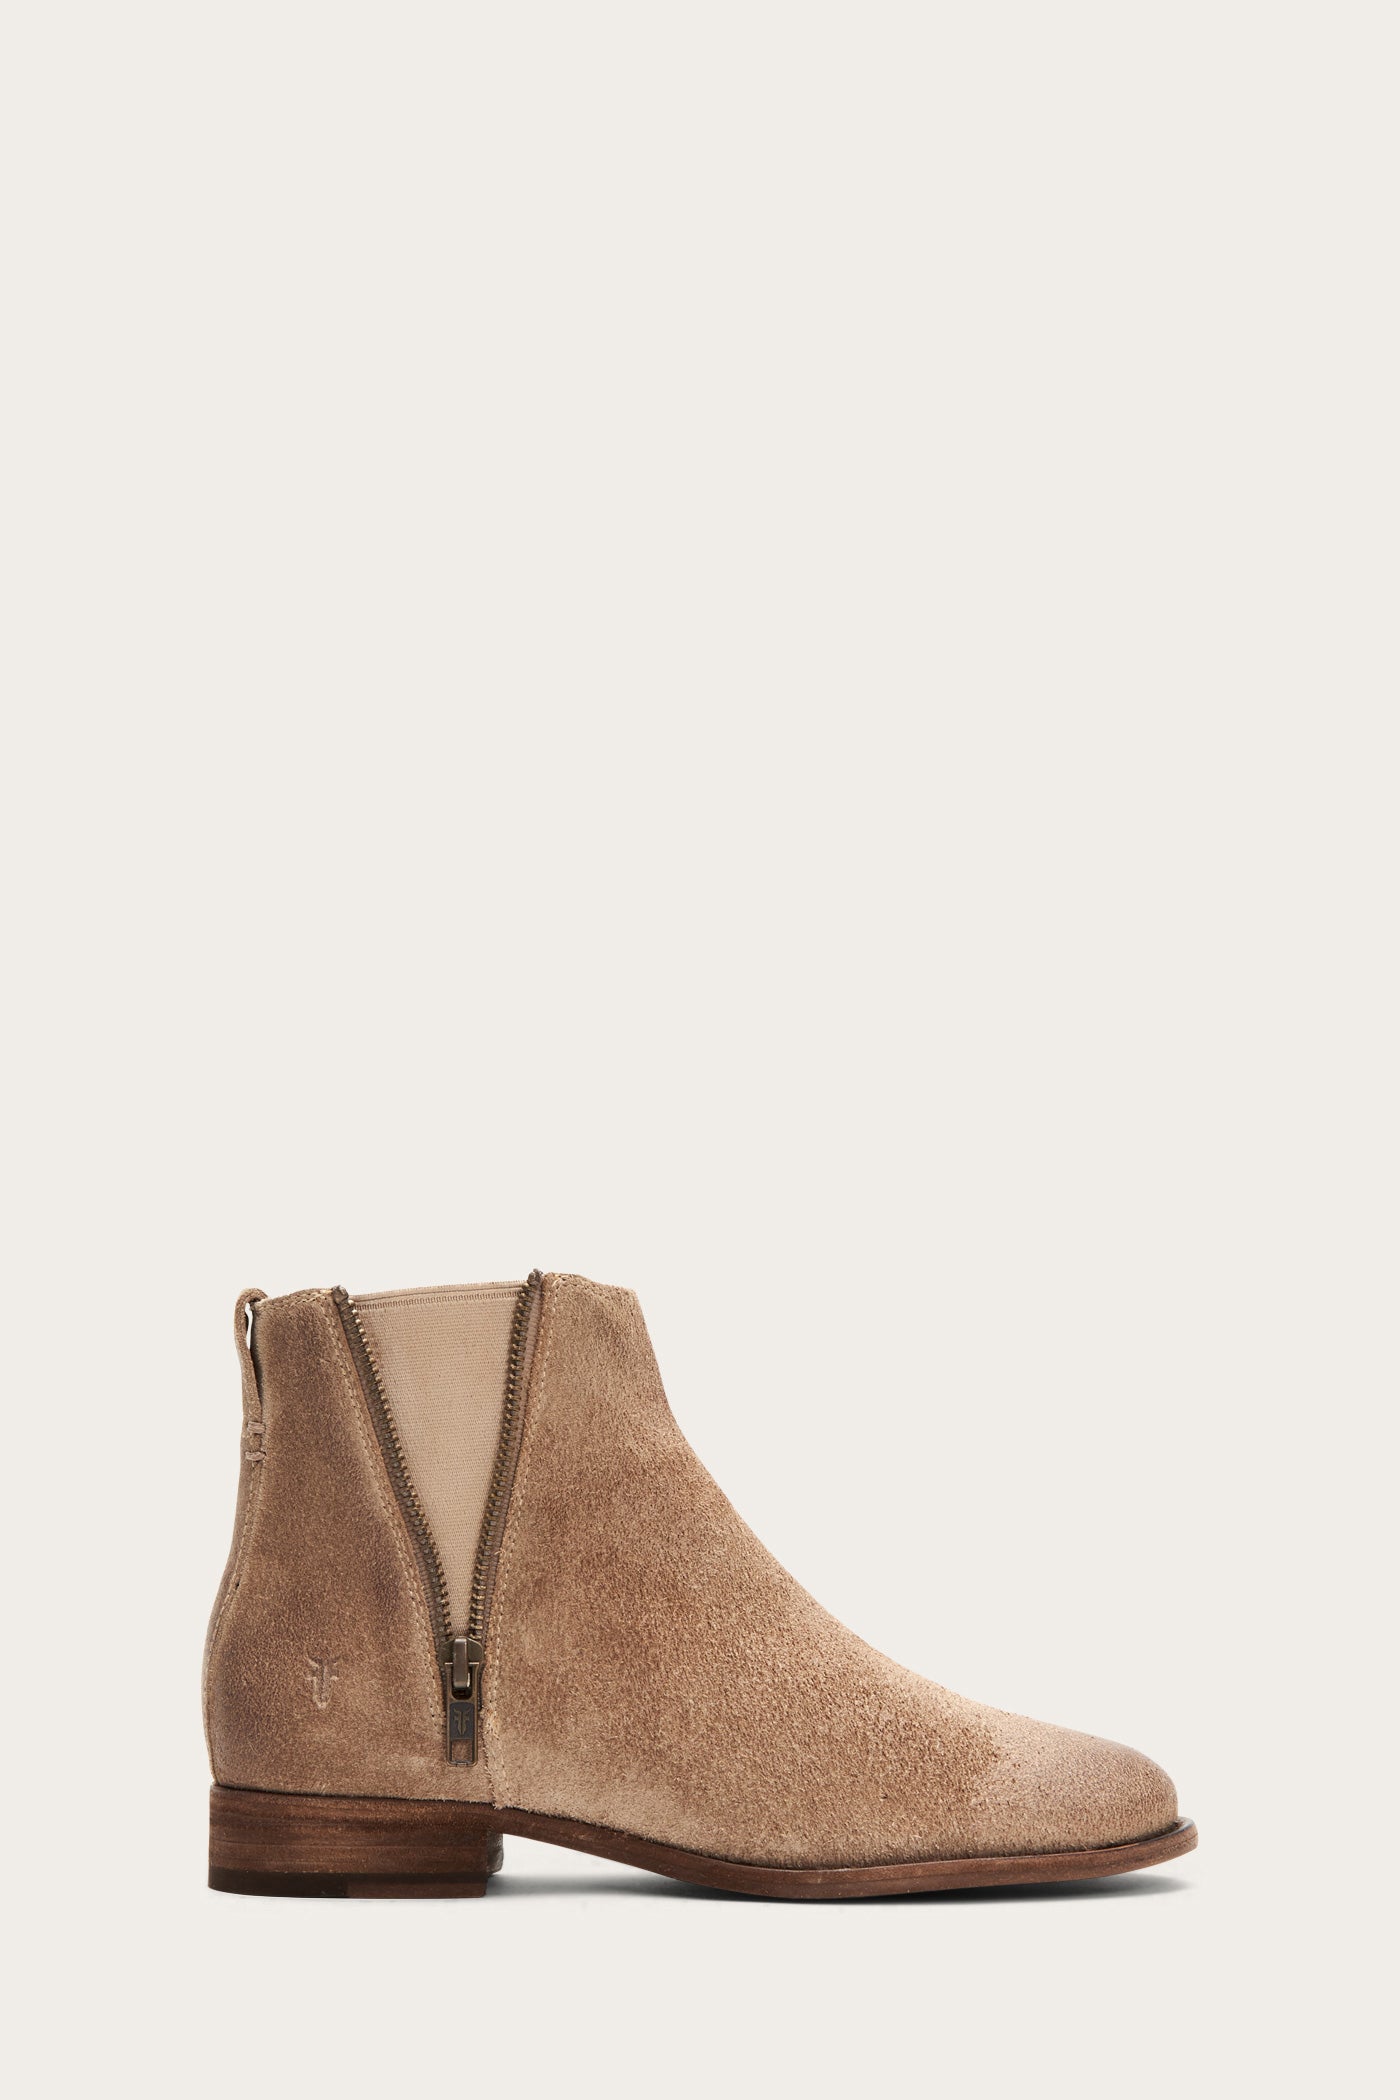 frye carly bootie